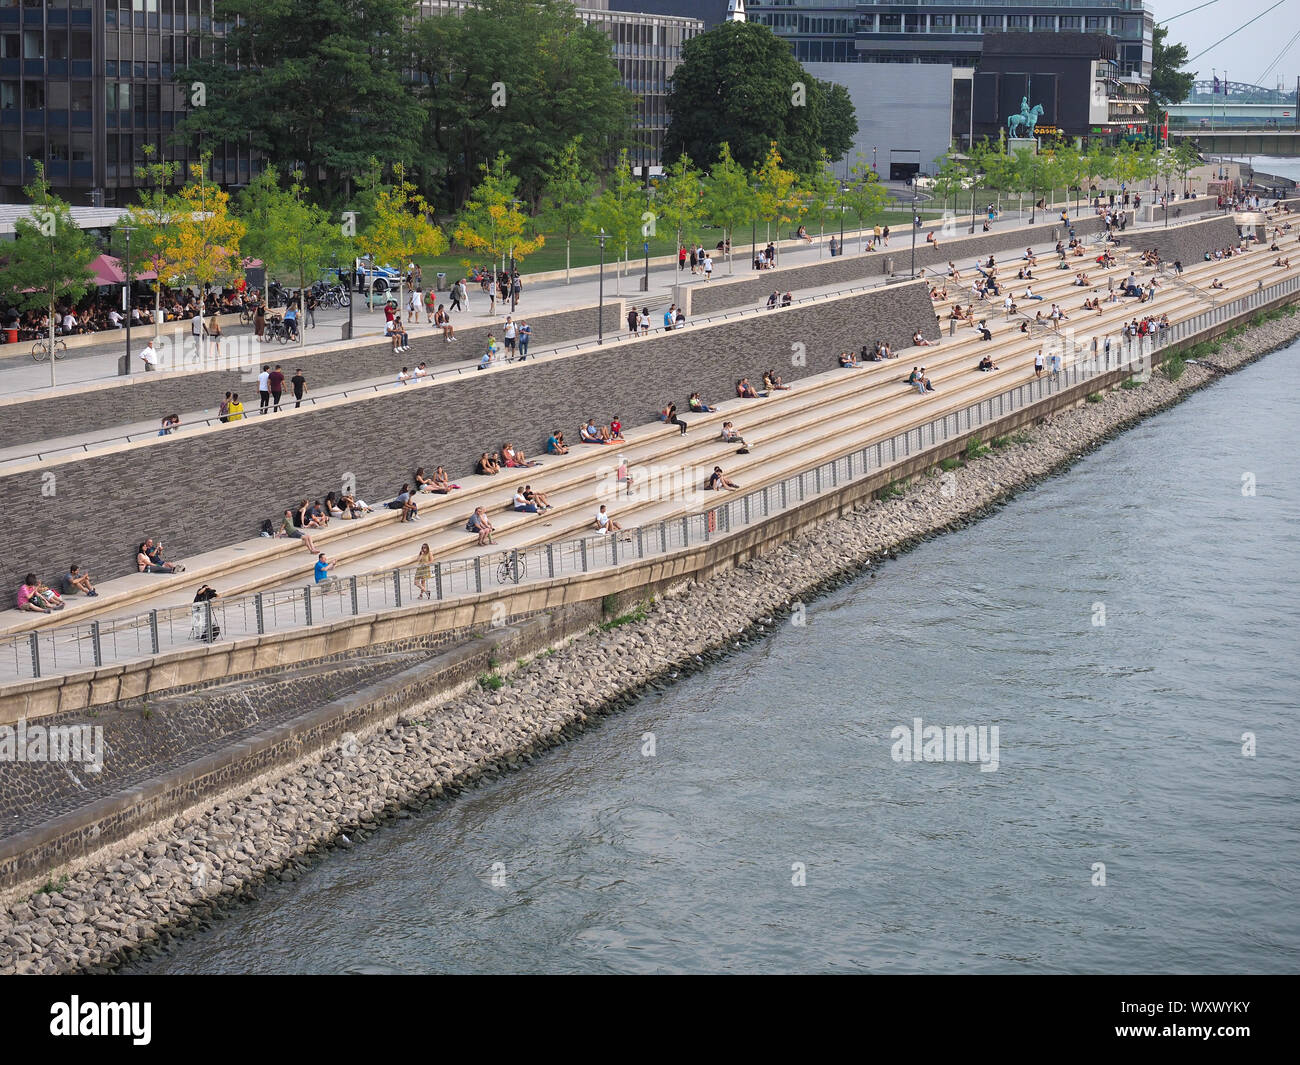 KOELN, GERMANY - CIRCA AUGUST 2019: People sunbathing on Rheinboulevard  riverside walkway with steps overlooking the river Rhine, old town and  cathedr Stock Photo - Alamy